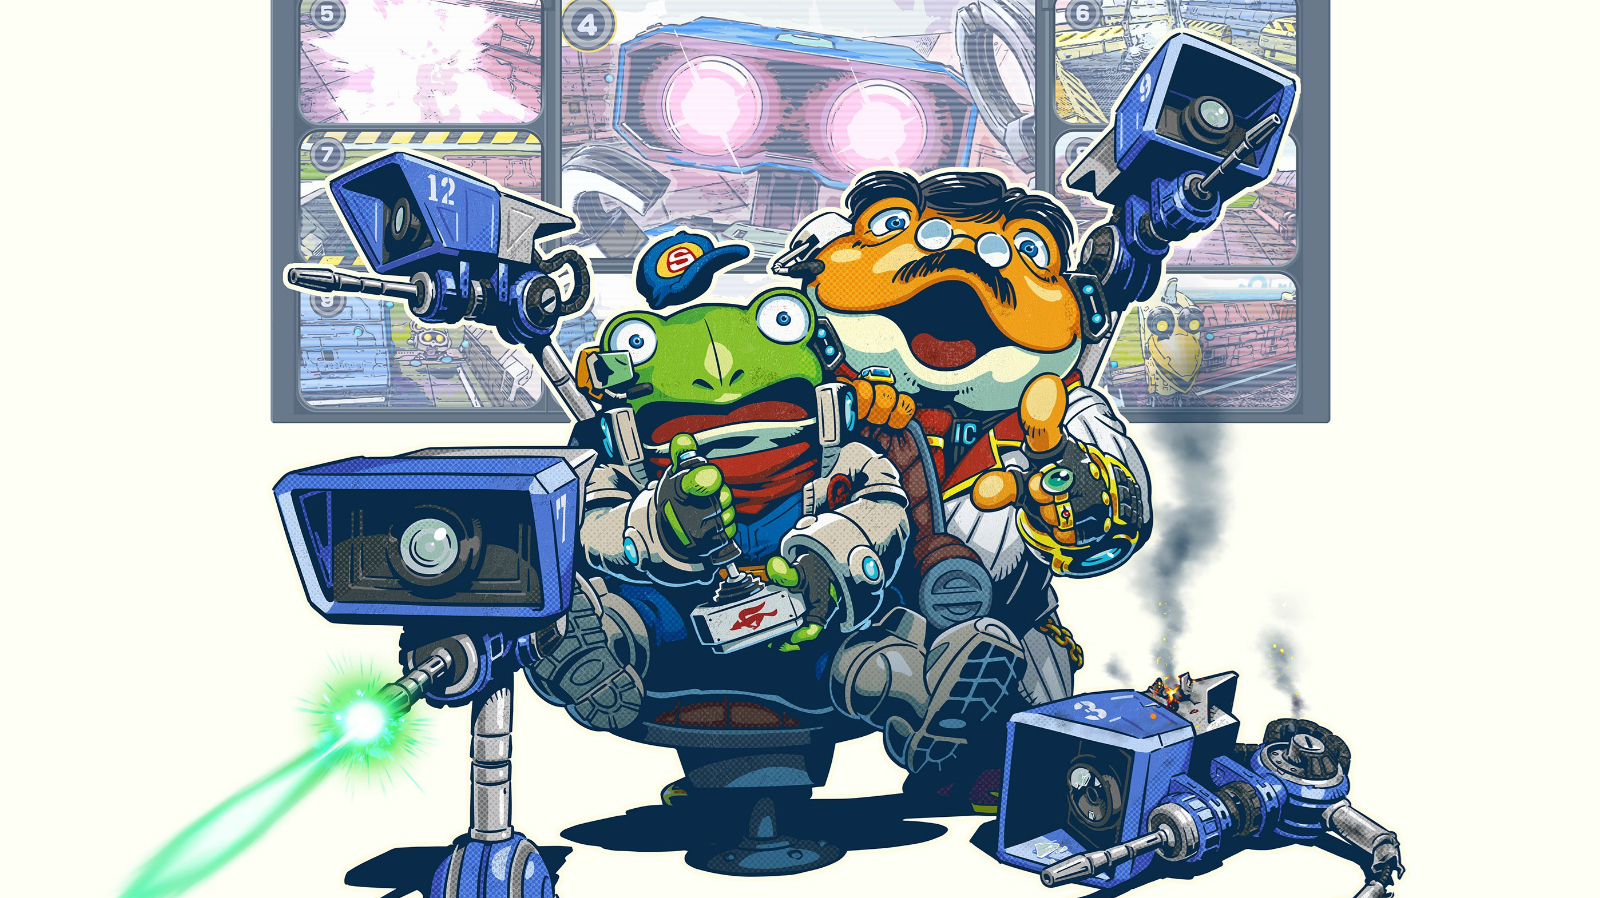 E3 2014: Connecting Star Fox on Wii U with Project Guard and